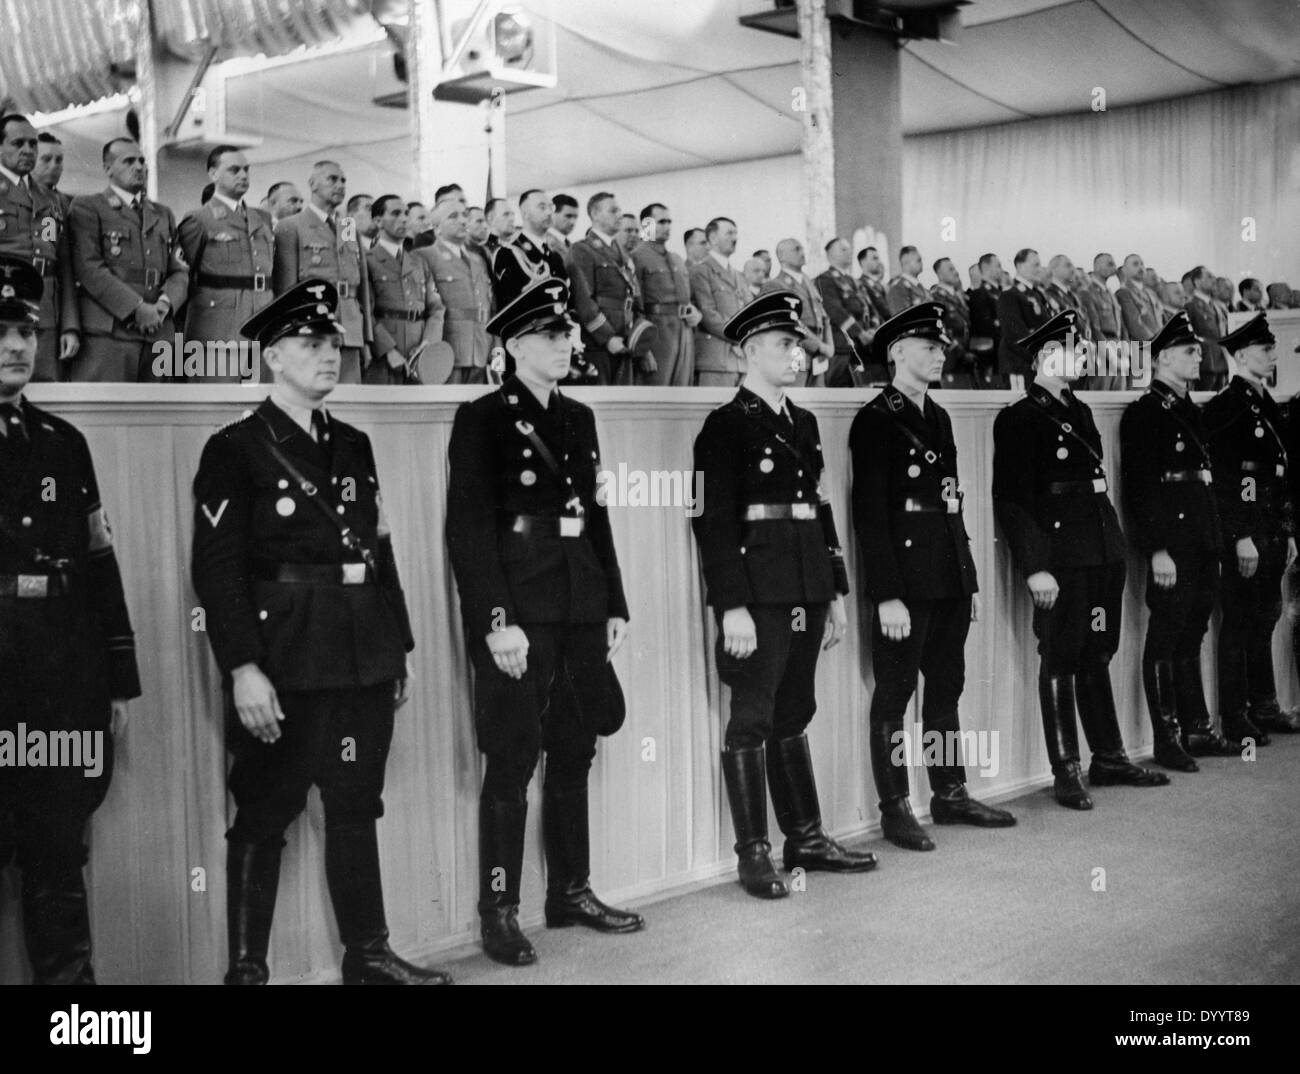 SS-men at a Nazi event, 1933 Stock Photo